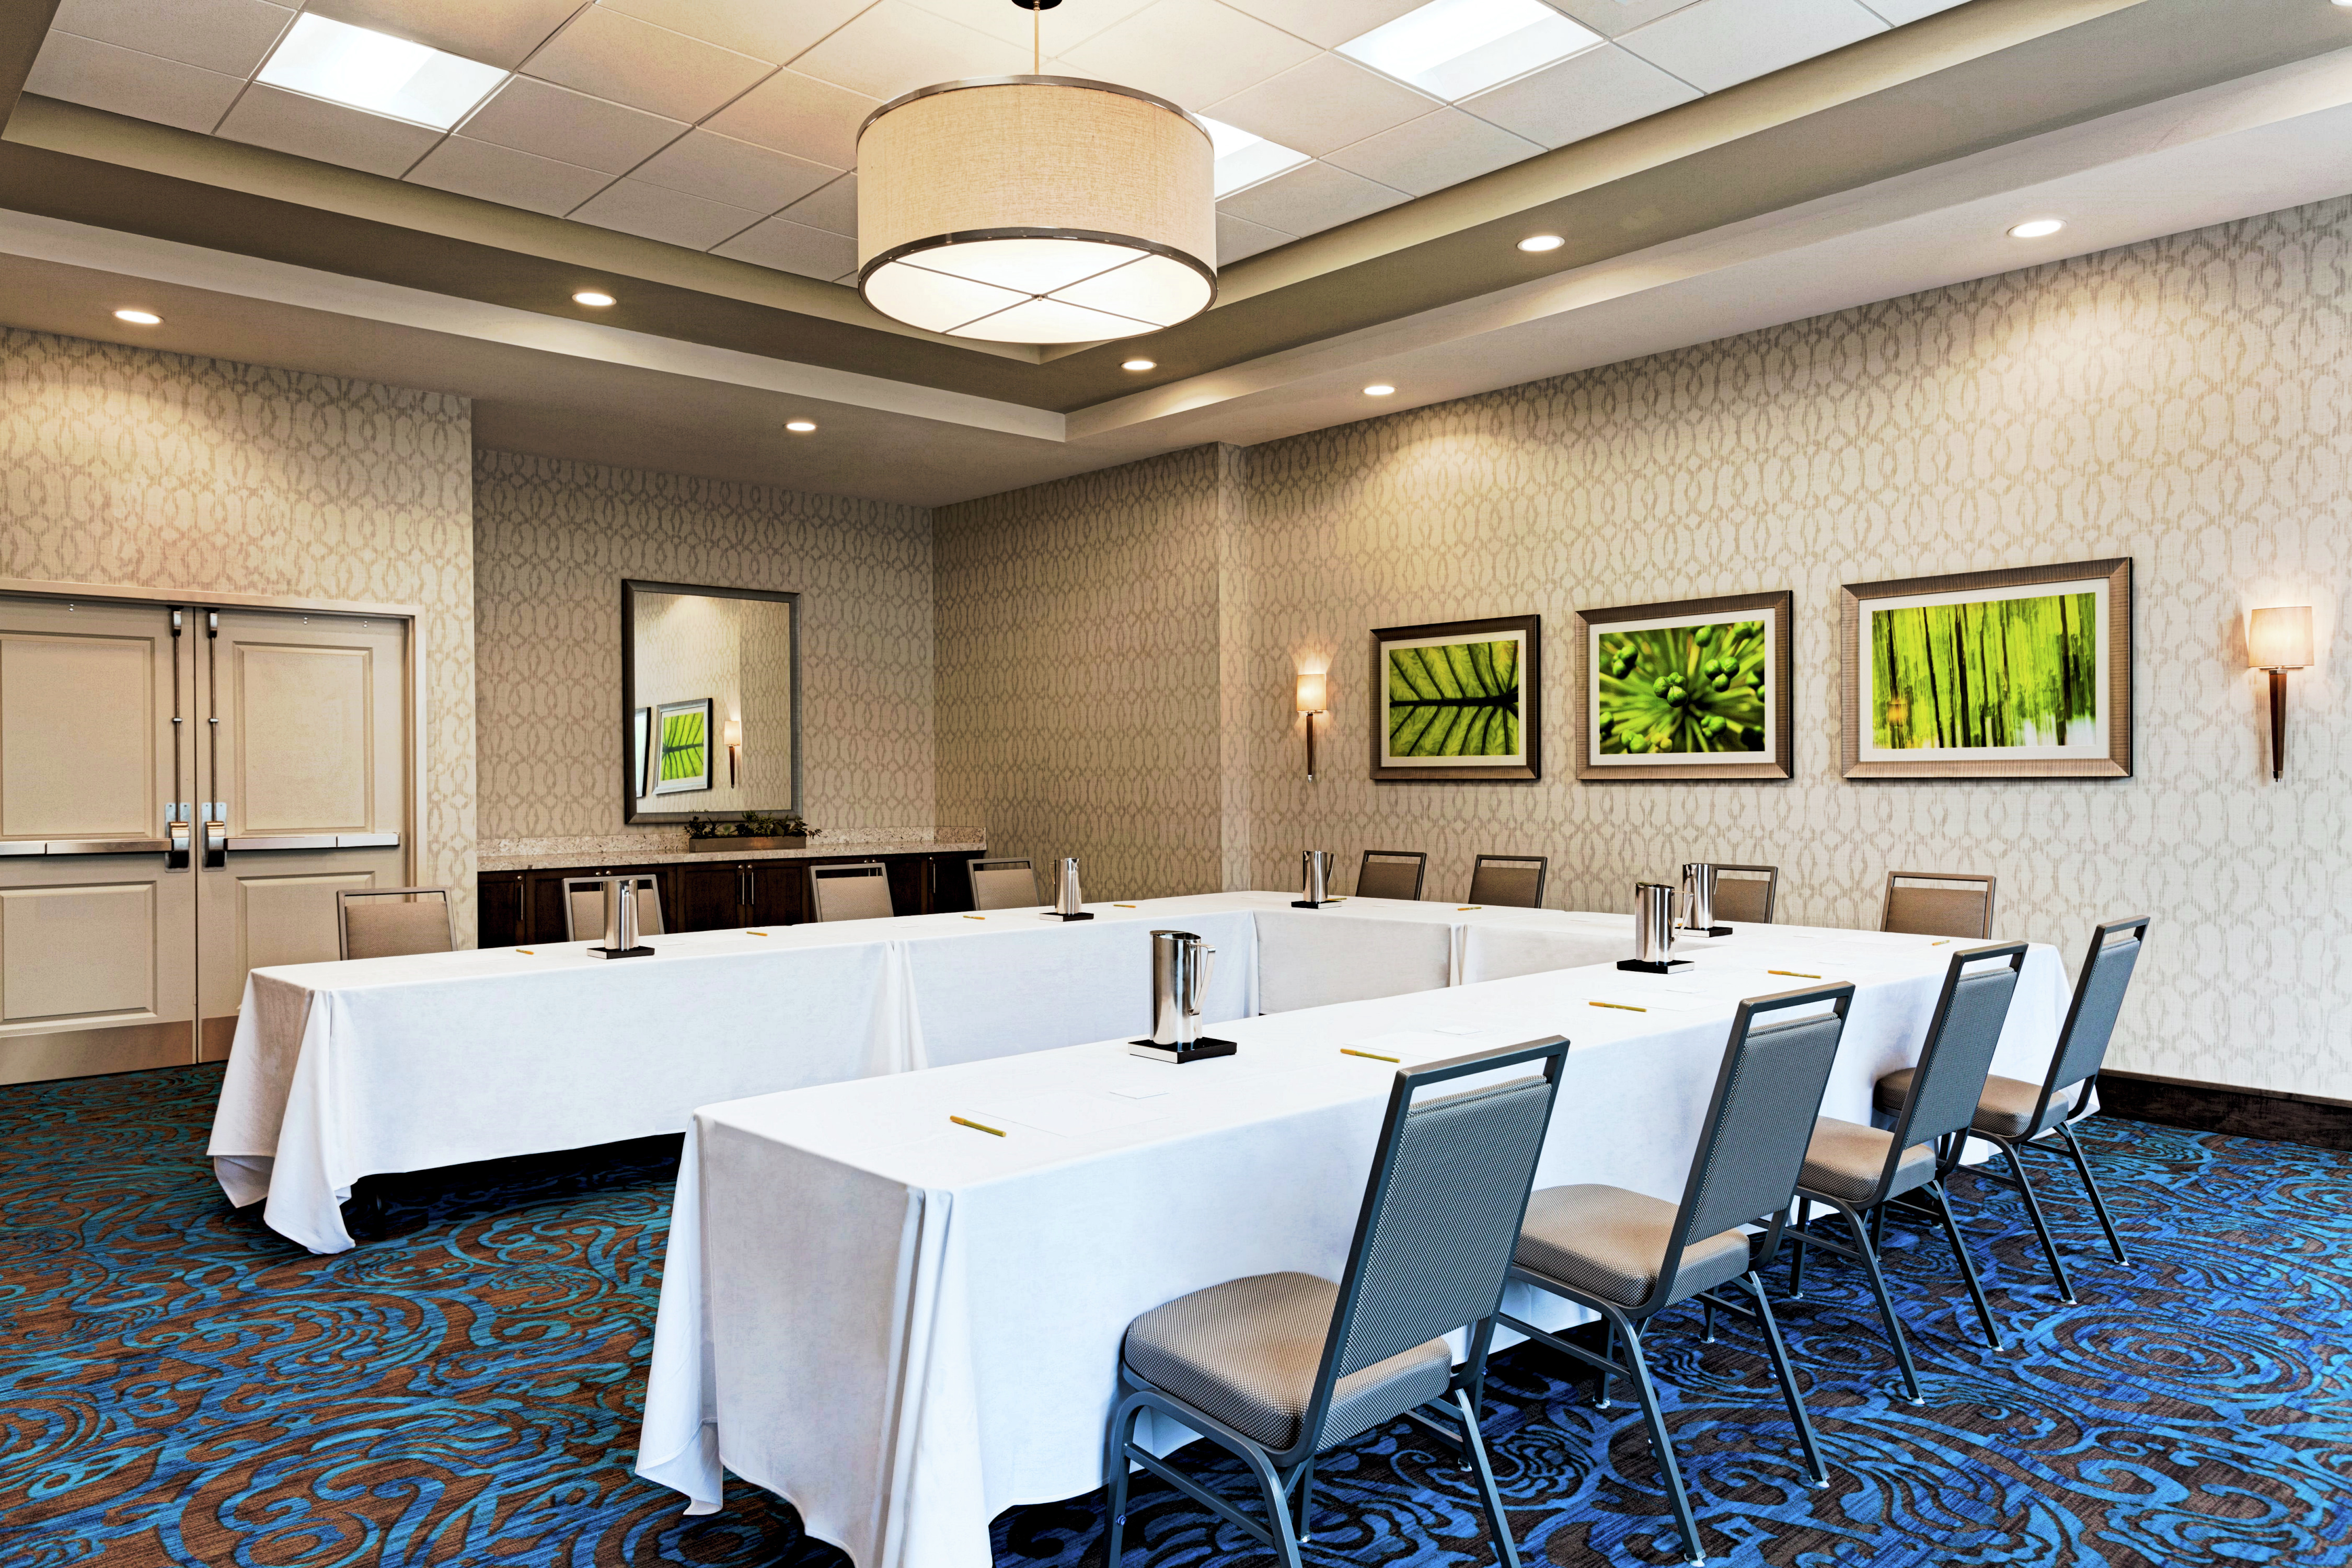 Hotel Meeting Room With U-Shaped Table and Chairs